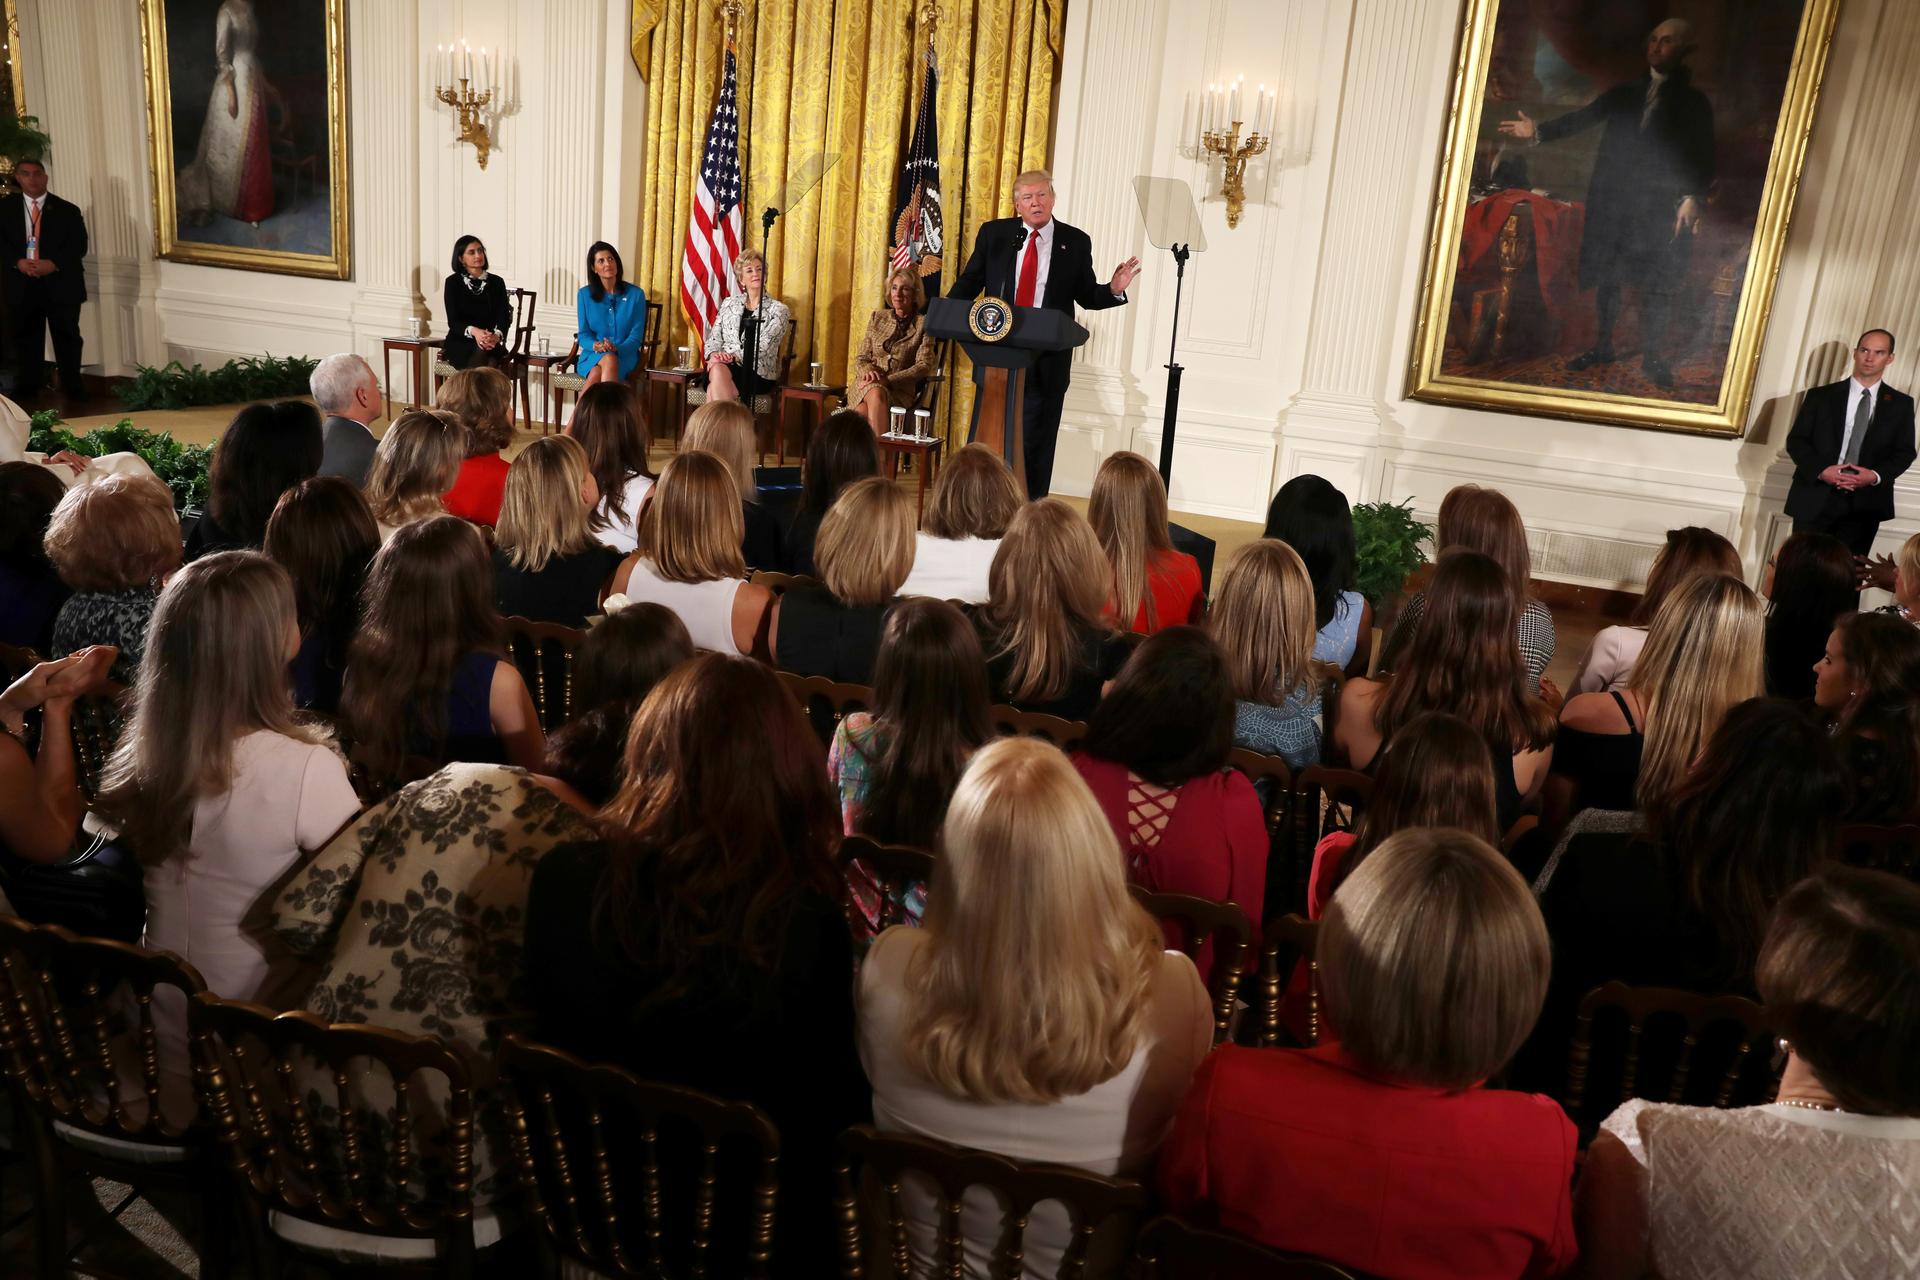 President Donald Trump speaks at a Women's Empowerment Panel at the East Room of the White House in Washington, March 29, 2017.